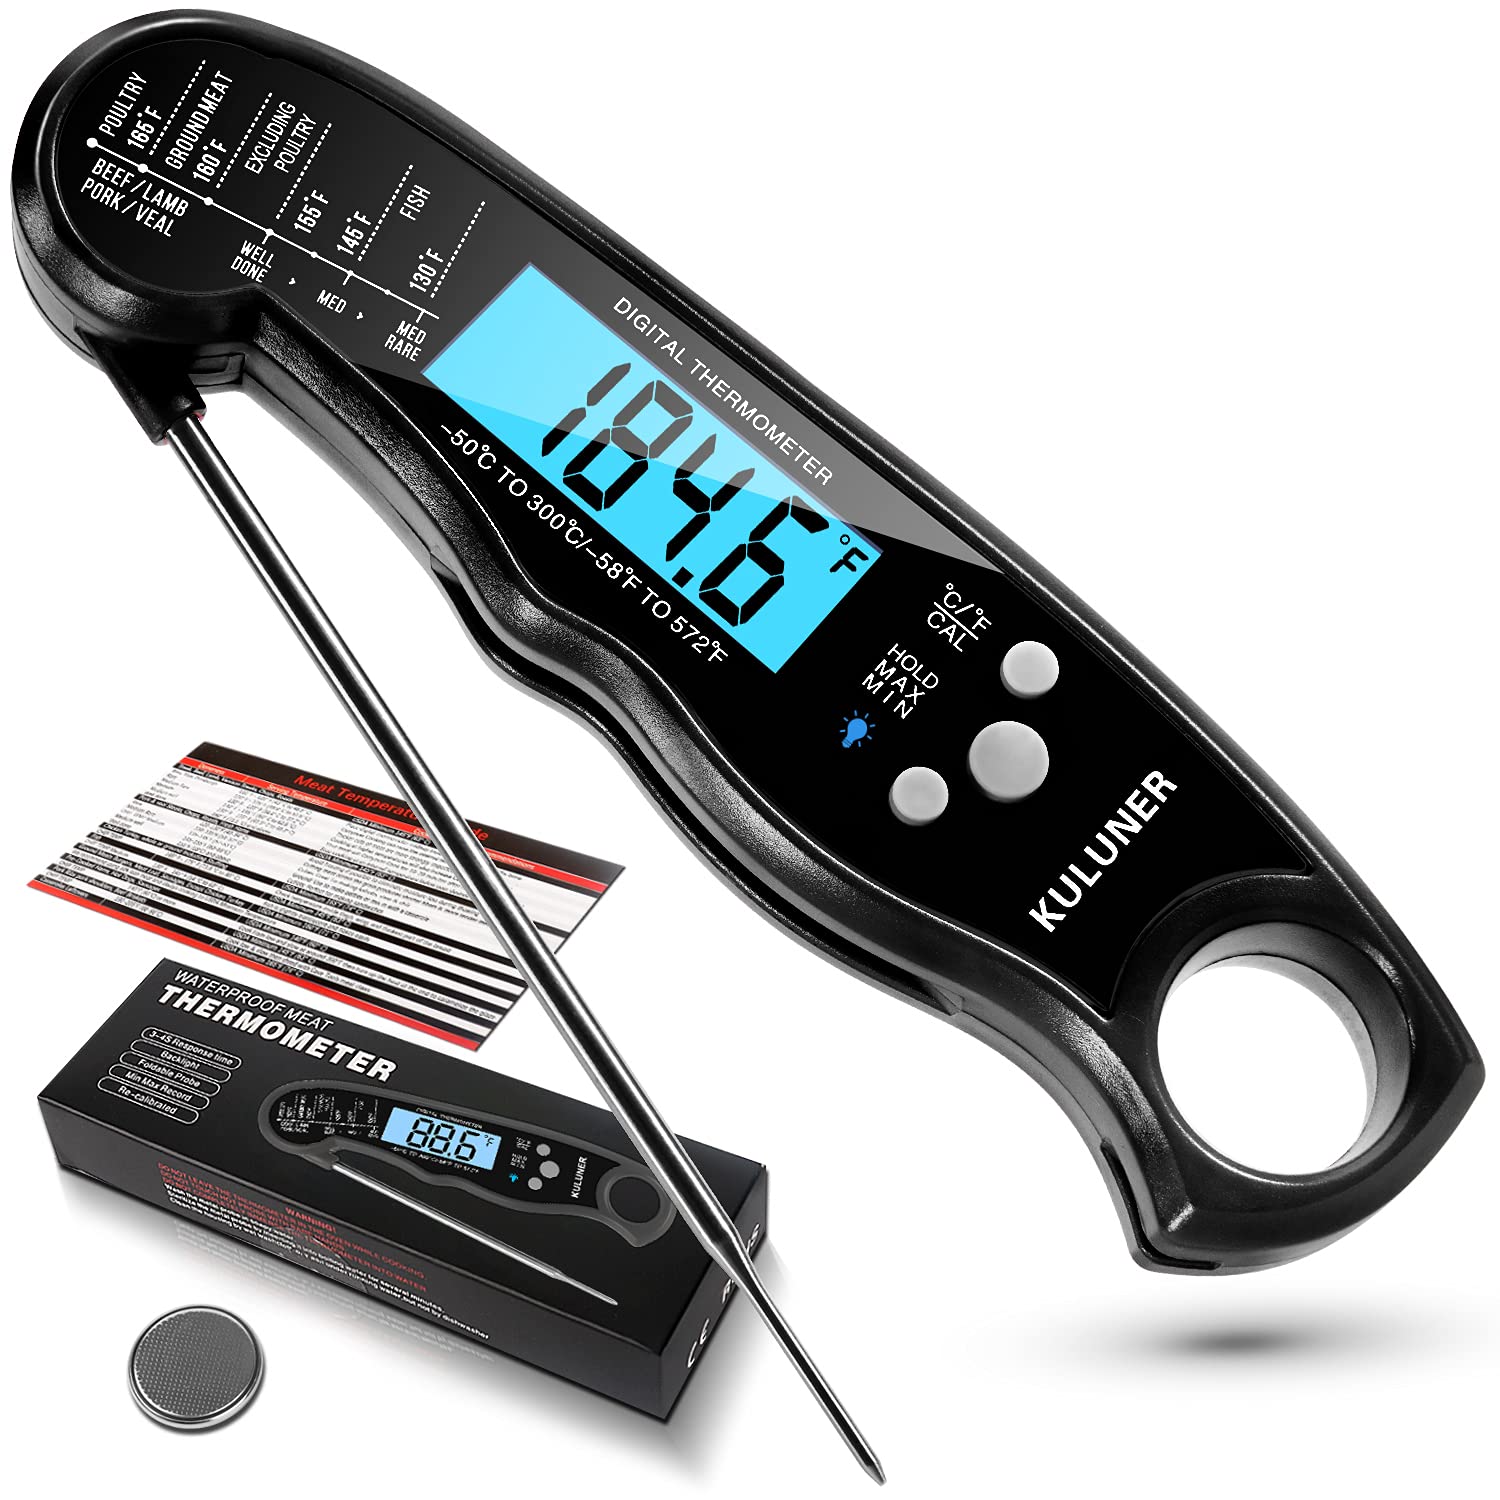 TP-01 Waterproof Digital Instant Read Meat LCD Thermometer with 4.6” Folding Probe Backlight  Calibration Function for Cooking Food Candy, BBQ Grill, Liquids,Beef(Black)